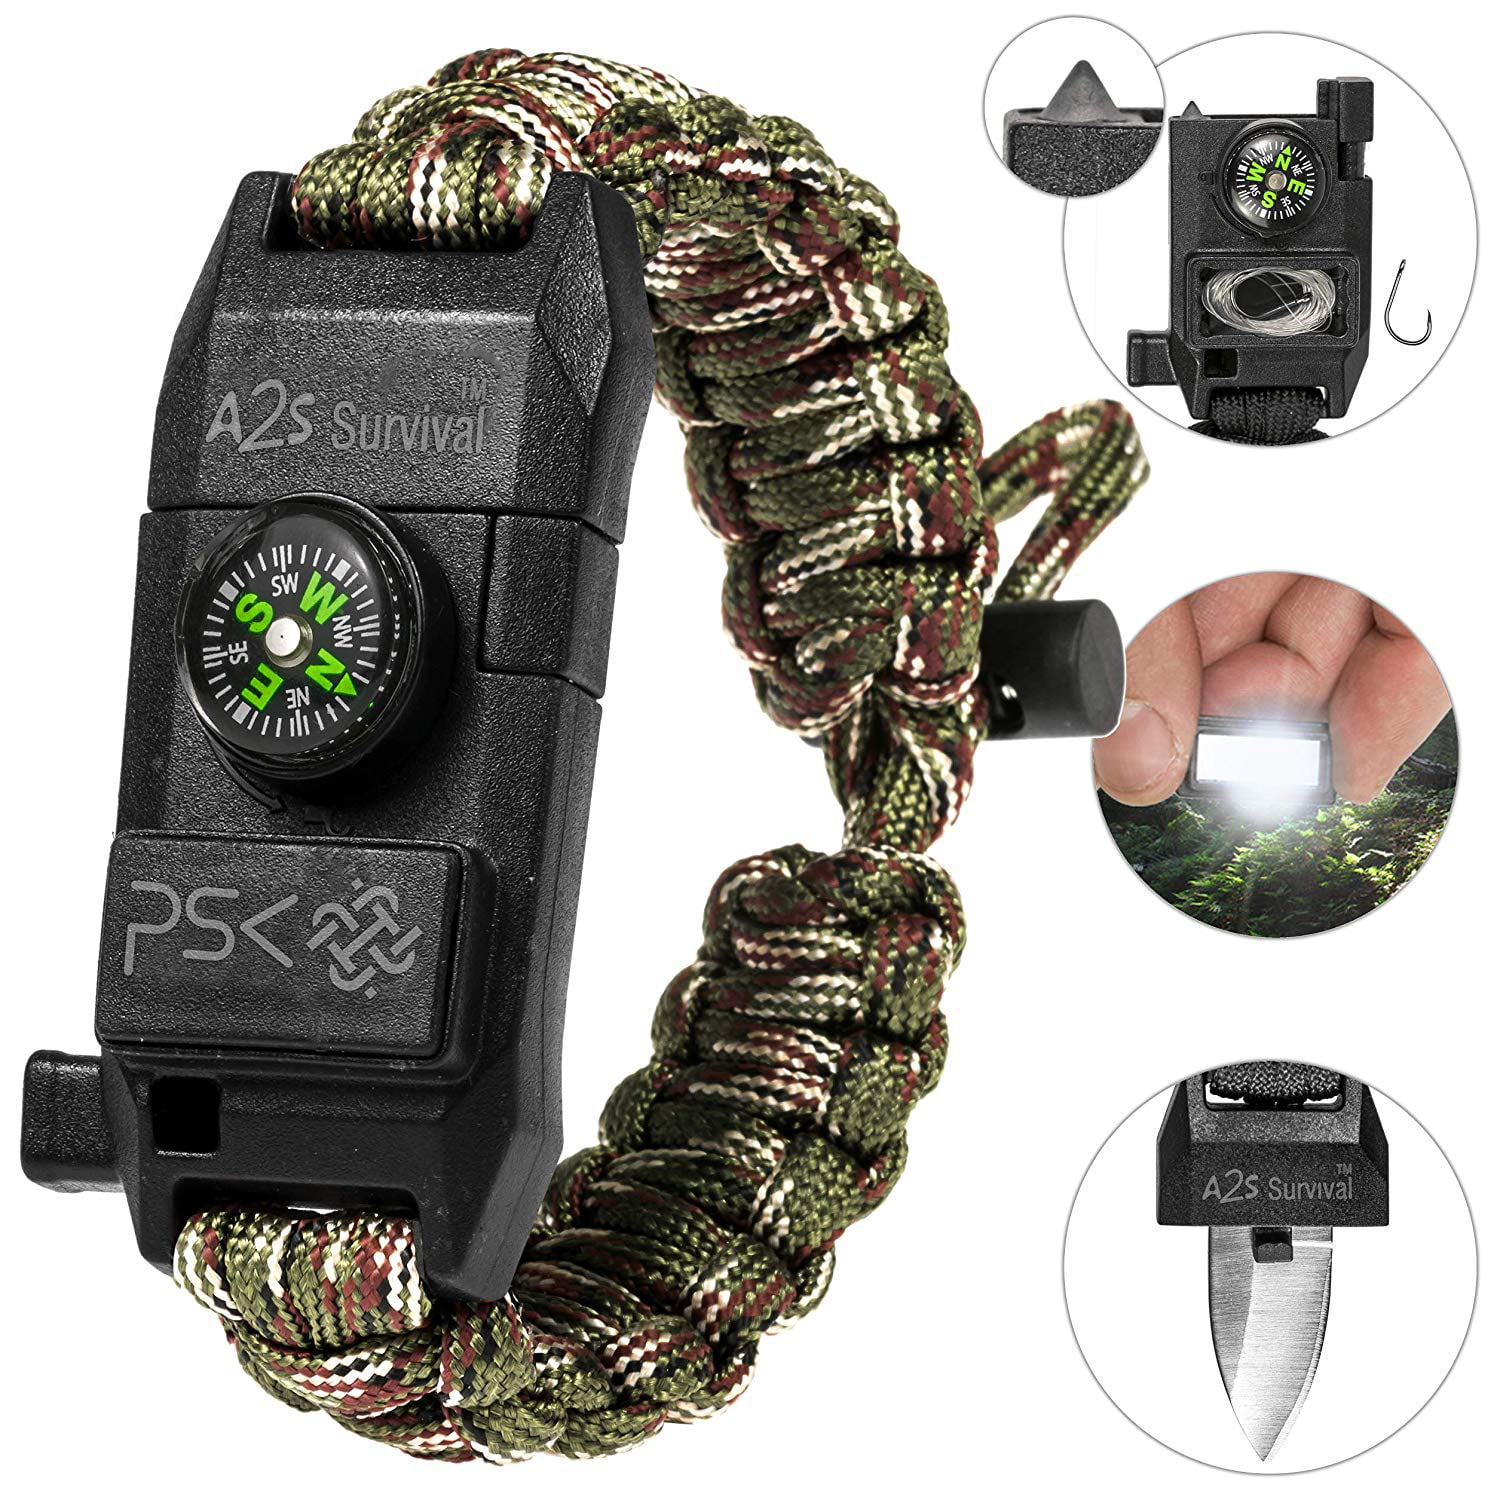 Whistle X-Plore Gear Emergency Paracord Bracelets Set Of 2| The ULTIMATE Tactical Survival Gear| Flint Fire Starter Compass & Scraper/Knife| BEST Wilderness Survival-Kit For Camping/Fishing & More